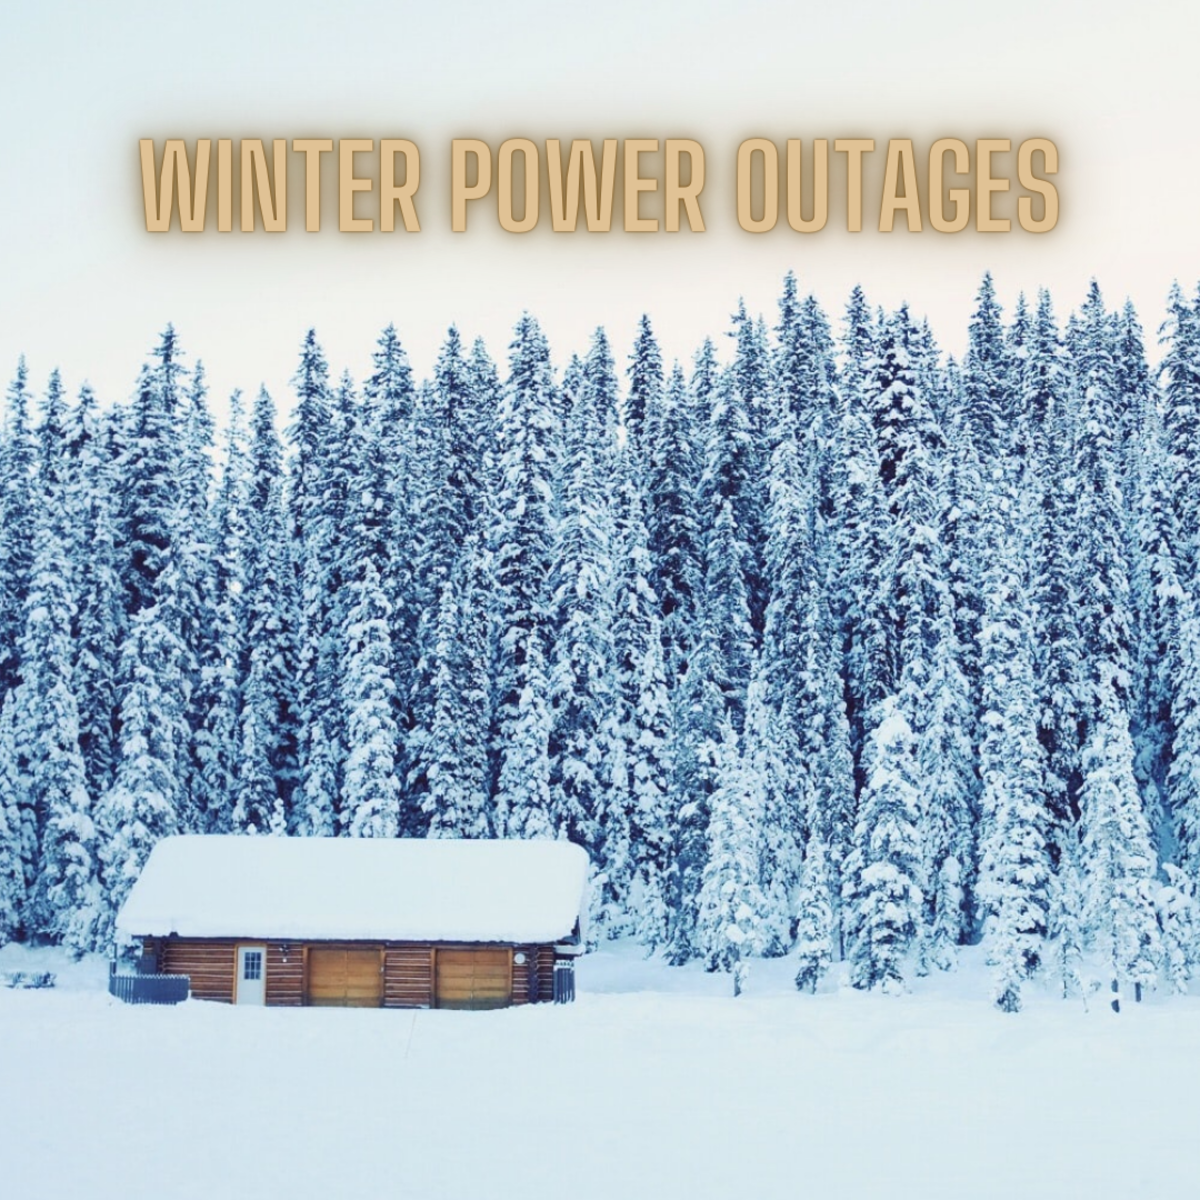 Winter Power Outage Tips for Cooking, Heating, and Lighting